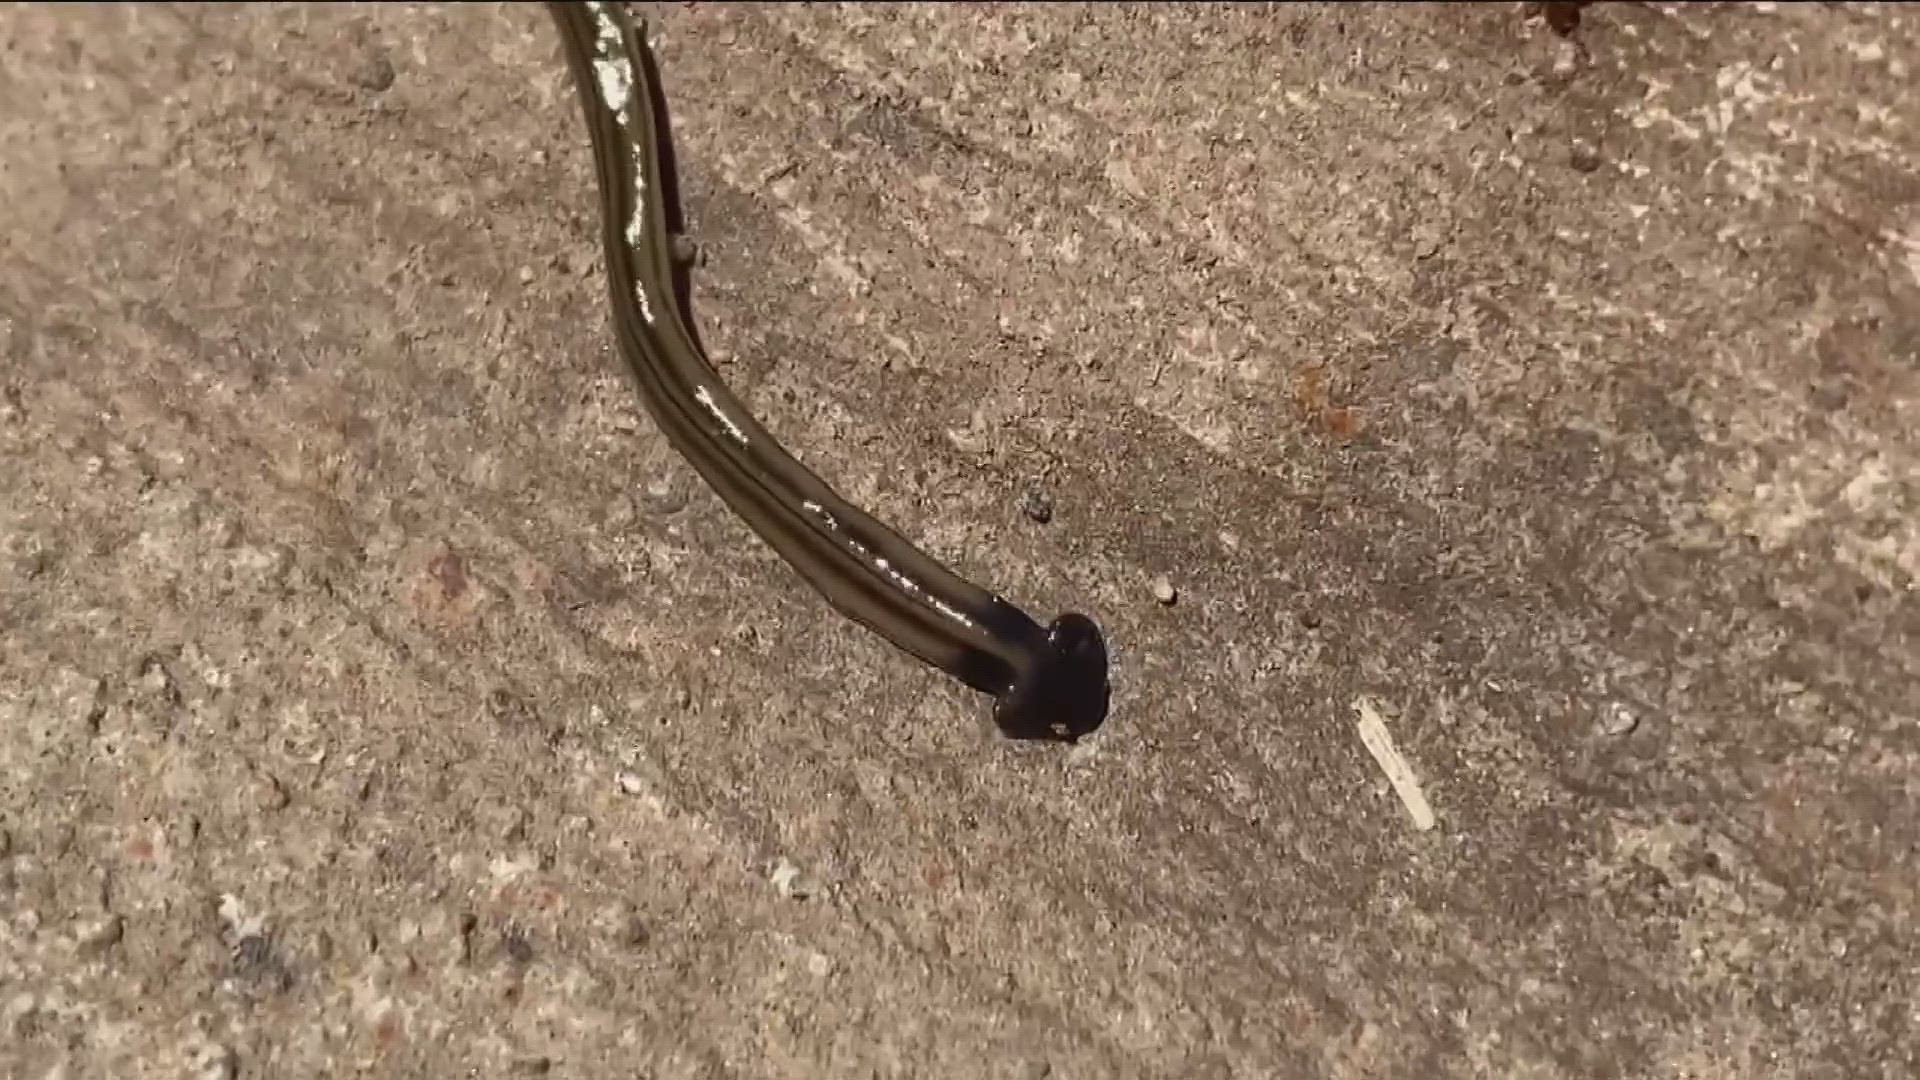 The snake-like worm which can grow up to 12 inches long helps control the invasive Asian jumping worm in the state that preys on the native Earthworm.